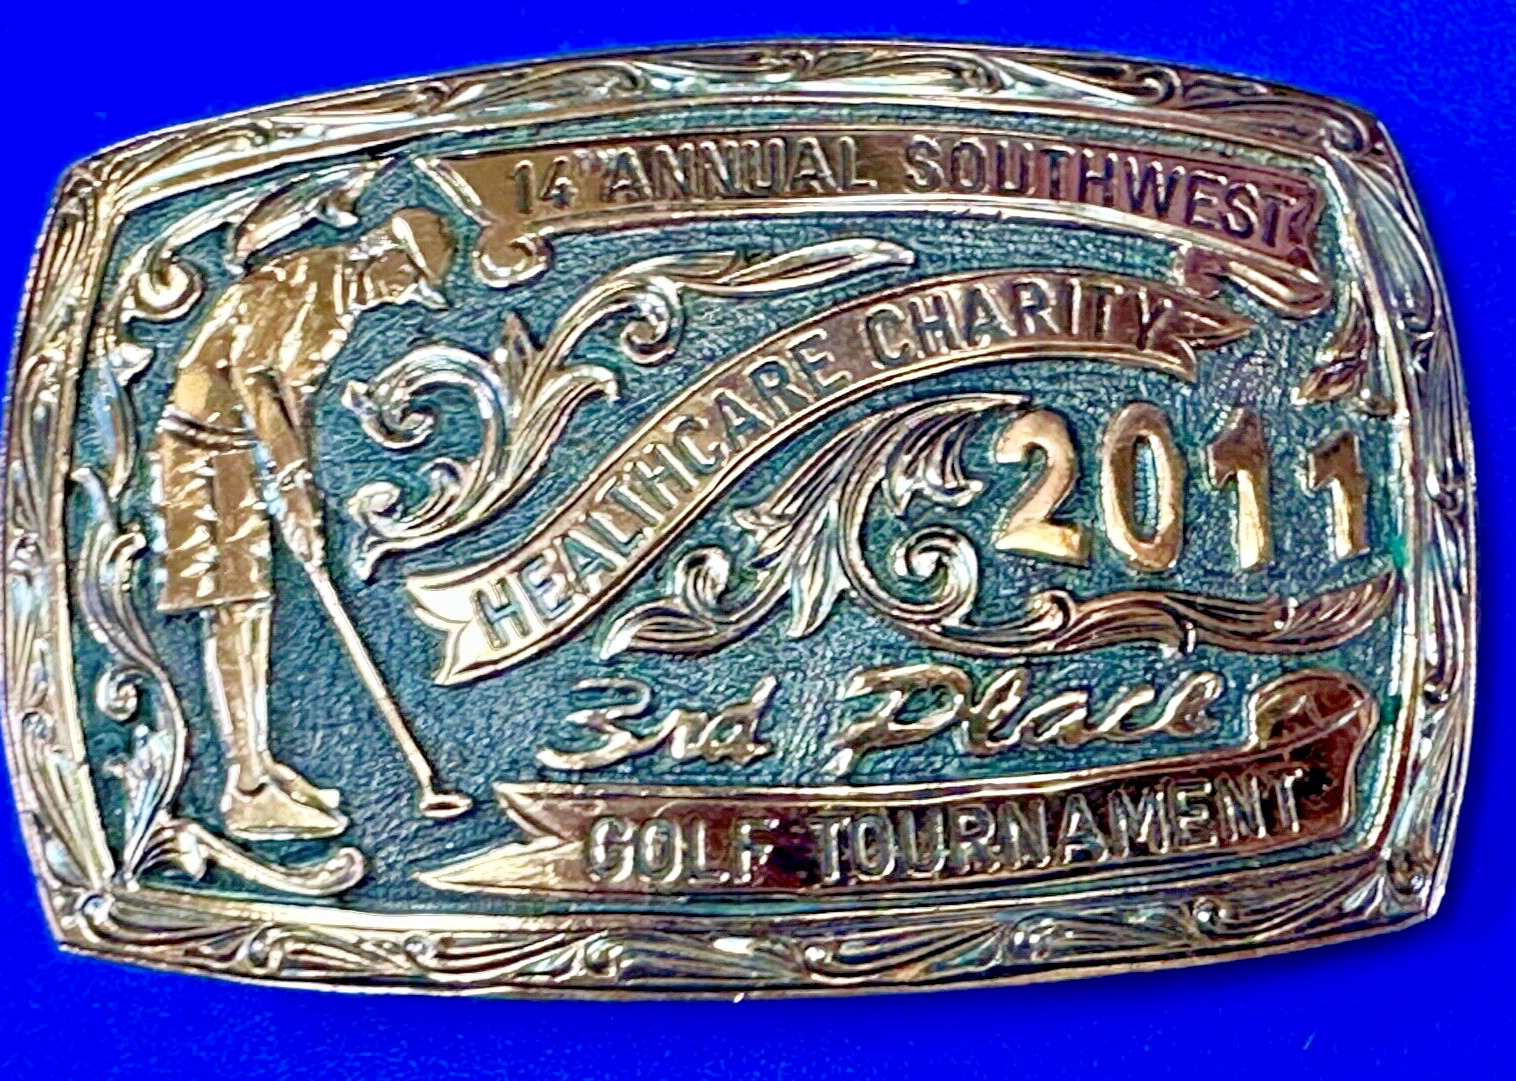 Golf Tournament 14th annual SW Healthcare Charity 3rd place Trophy belt buckle